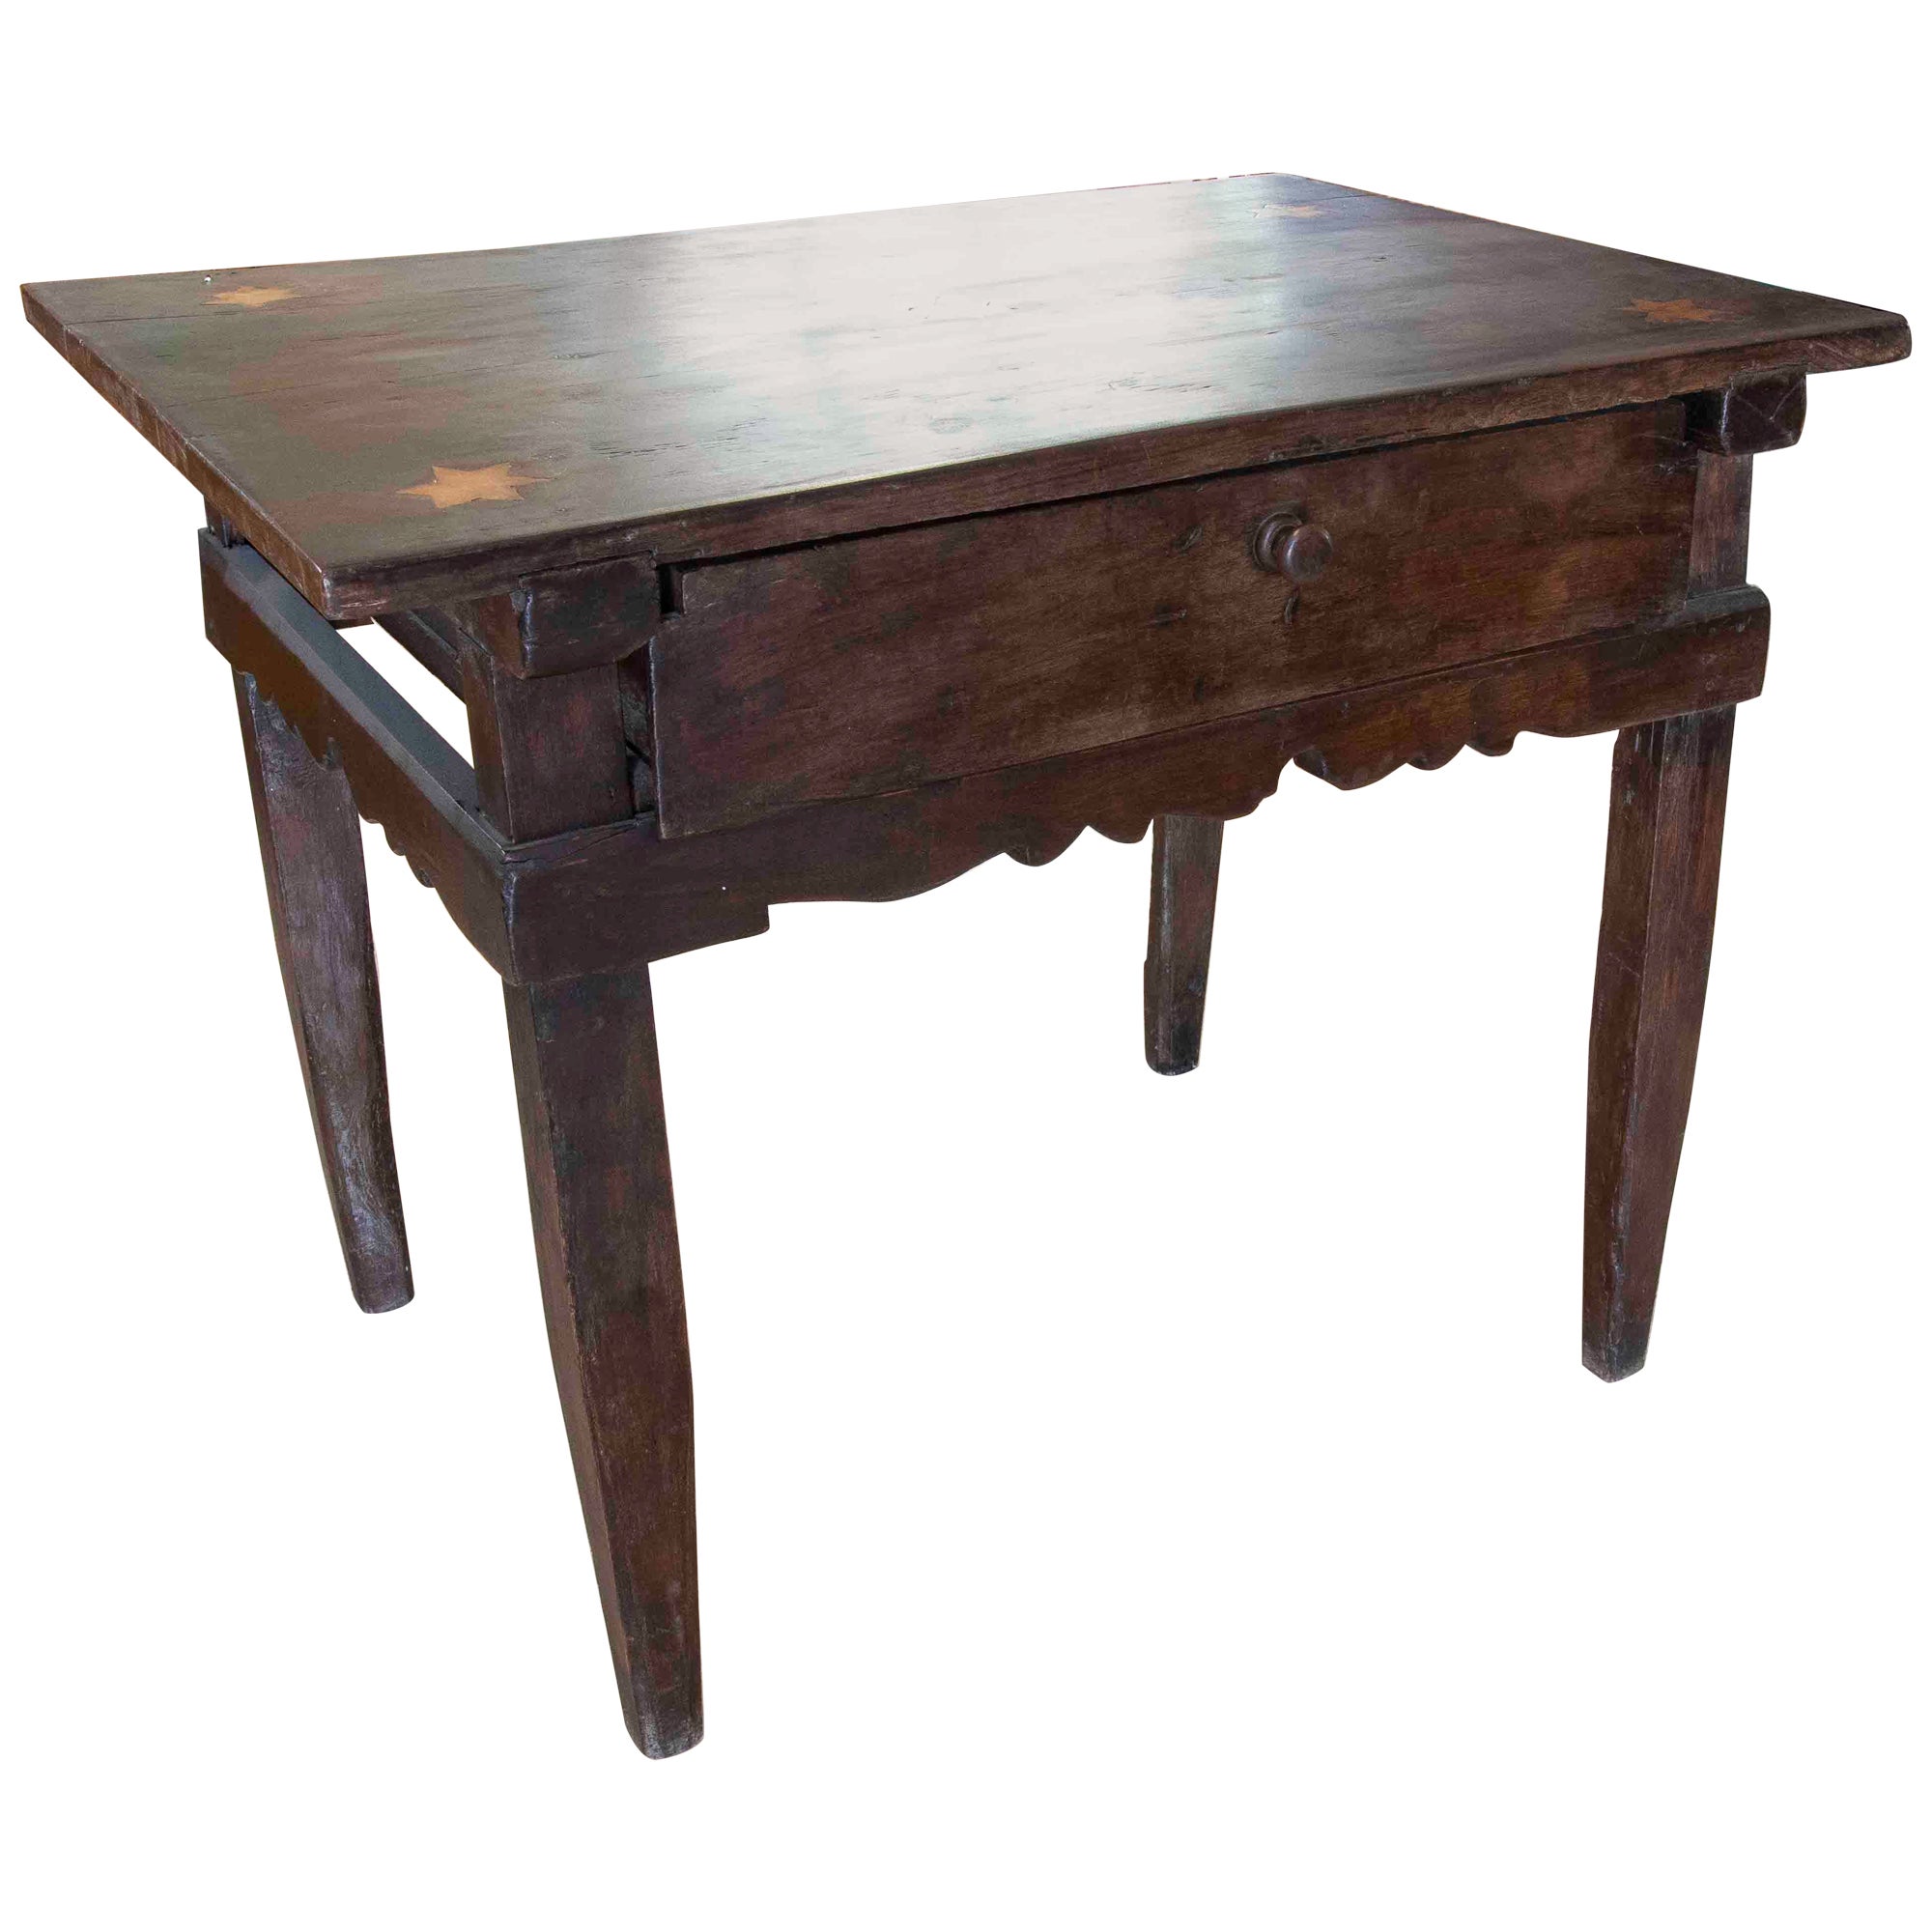 Spanish Low Table with Drawer and Star Inlay on the Top 